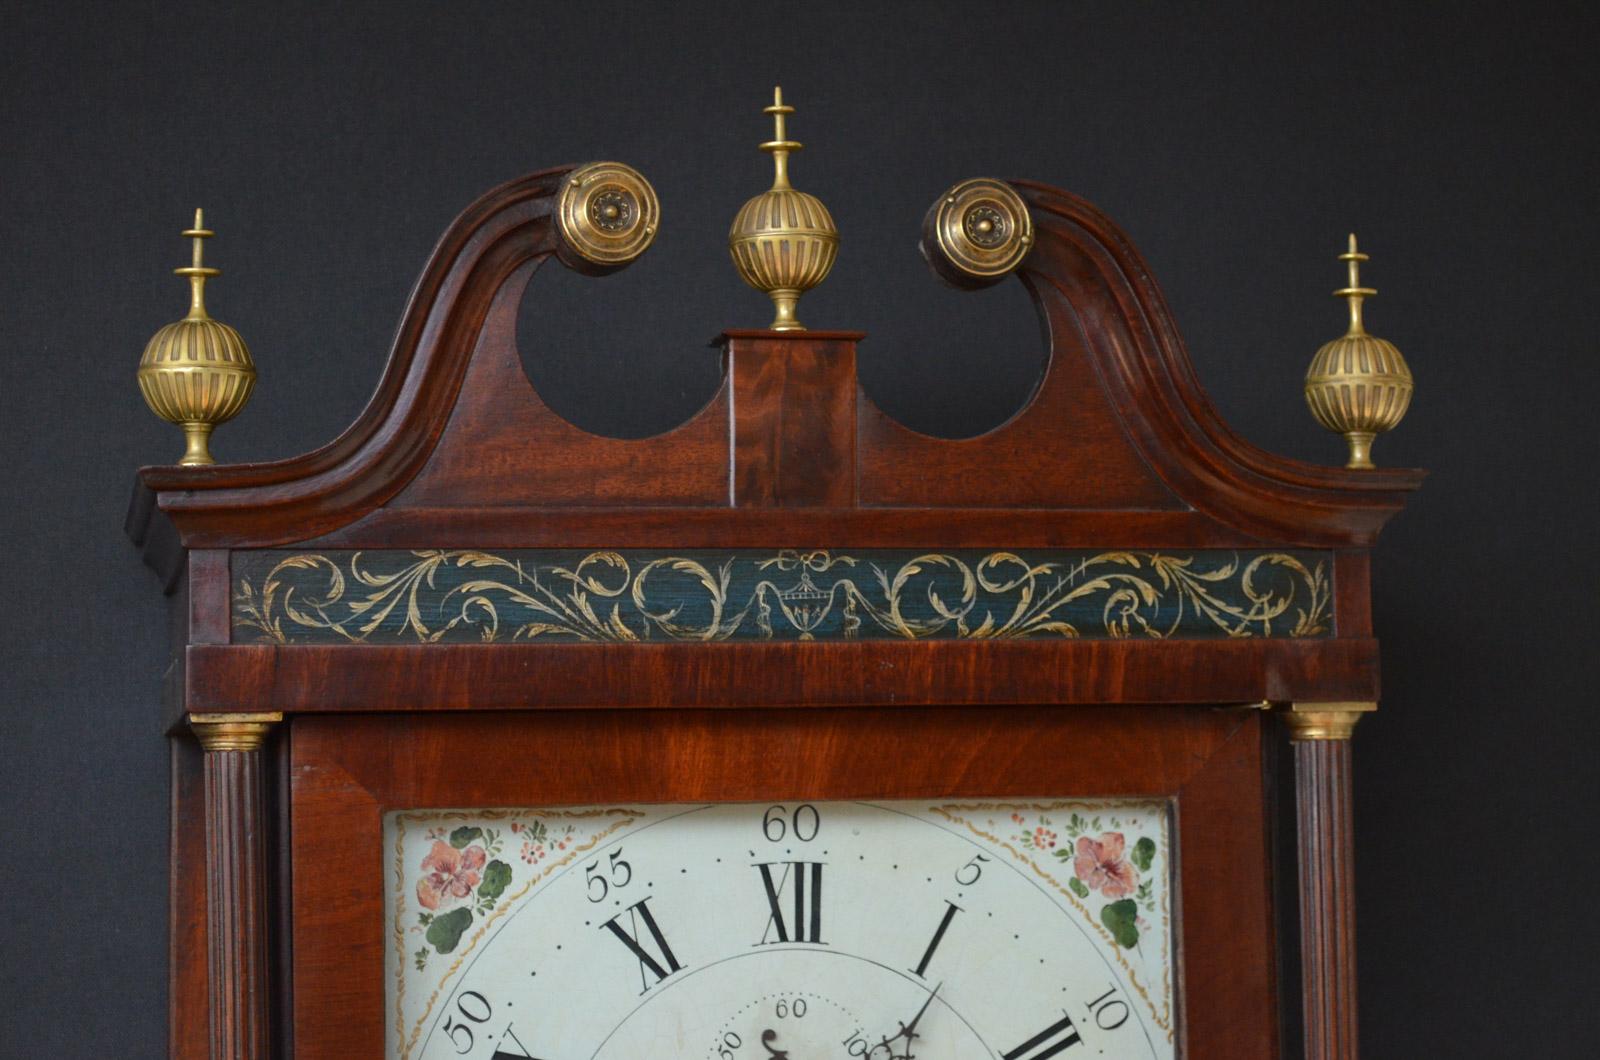 Sn3156 fine quality Georgian, mahogany and inlaid longcase clock, having white dial signed Collier, Eccles with subsidiary seconds and date aperture, Roman and Arabic numerals, two train 8-day movement with anchor escapement rack striking on a bell.